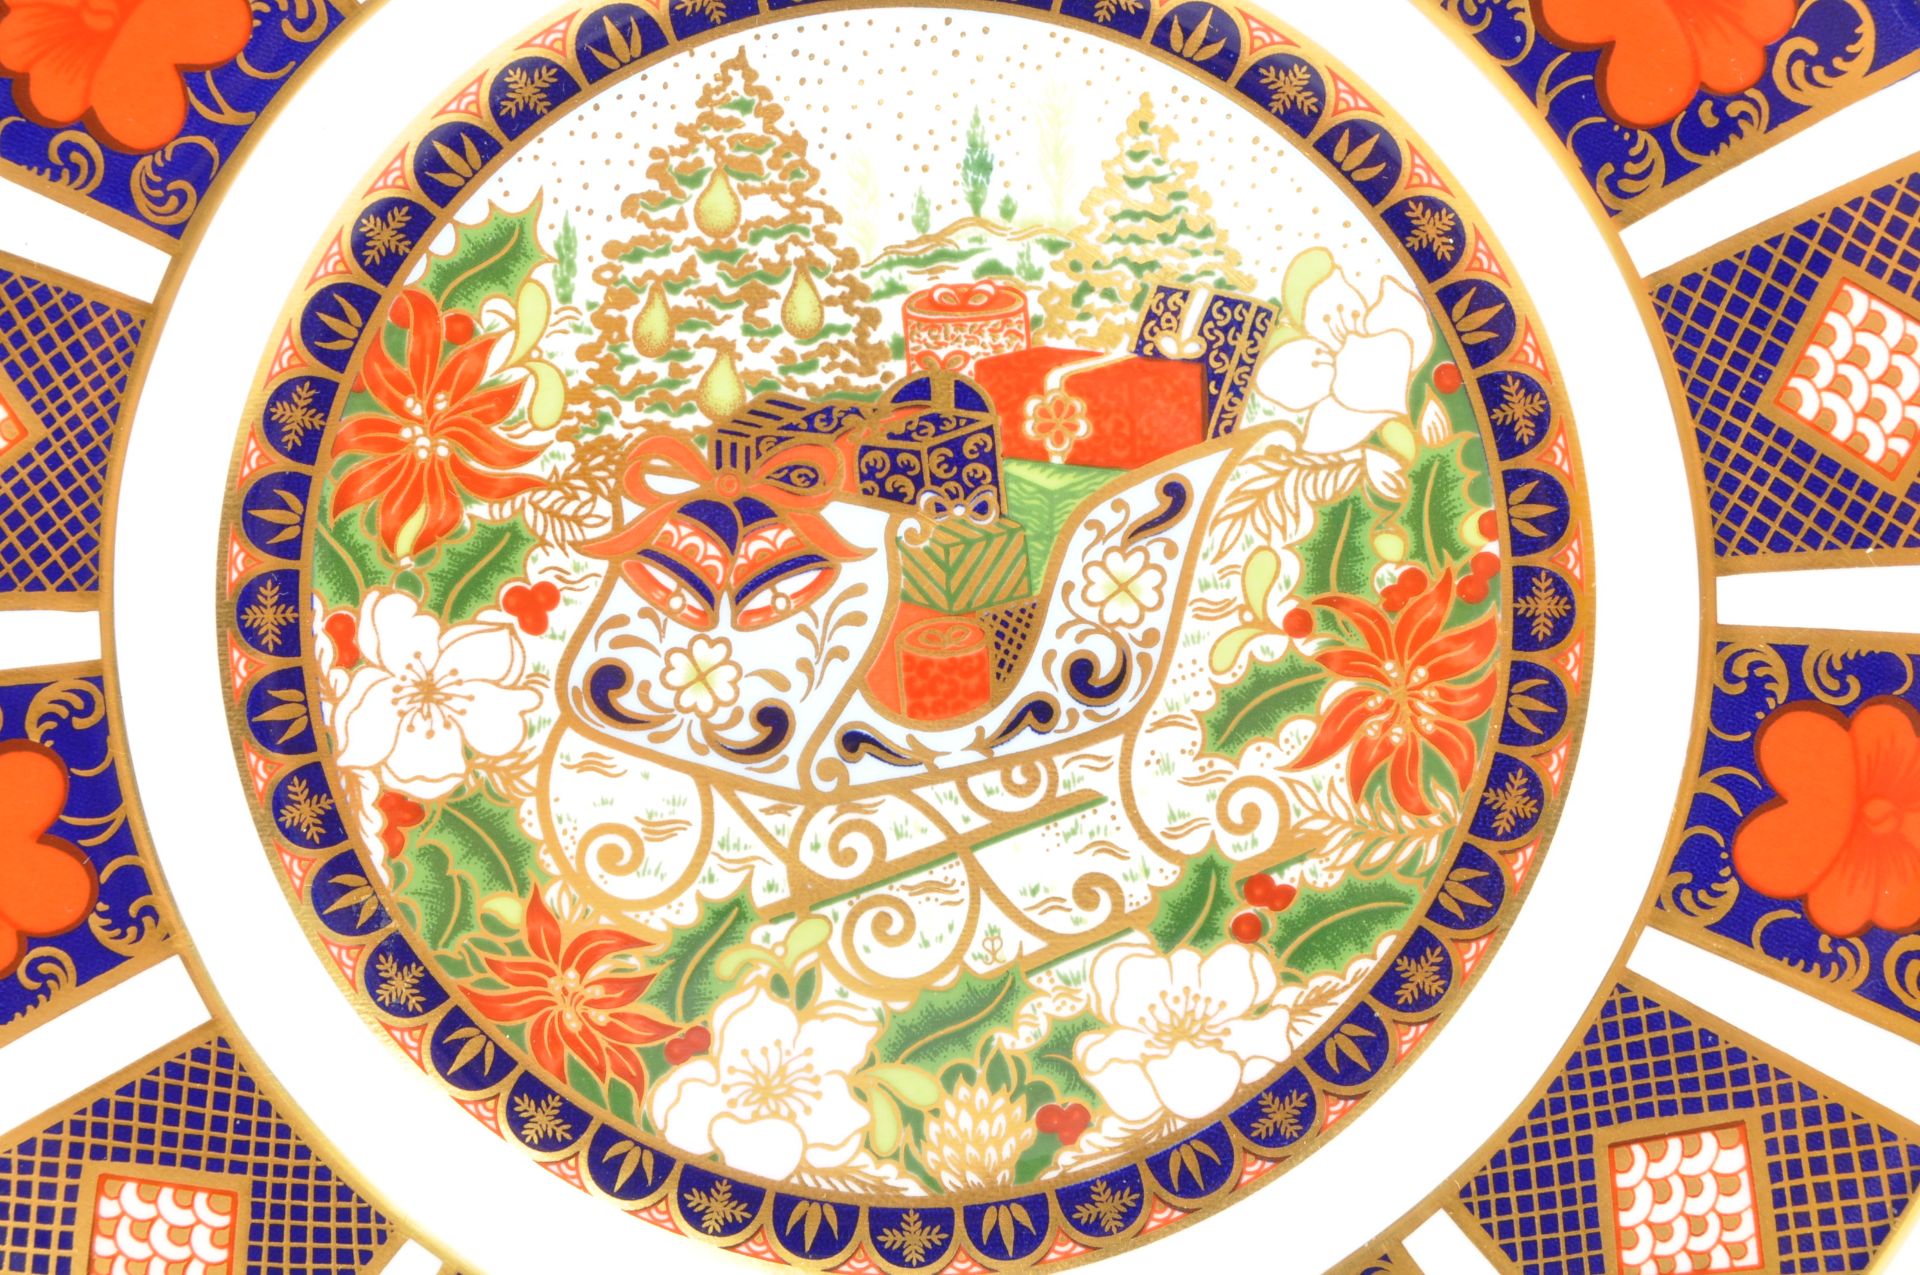 A COLLECTION OF ROYAL CROWN DERBY IMARI PLATES - Image 7 of 11